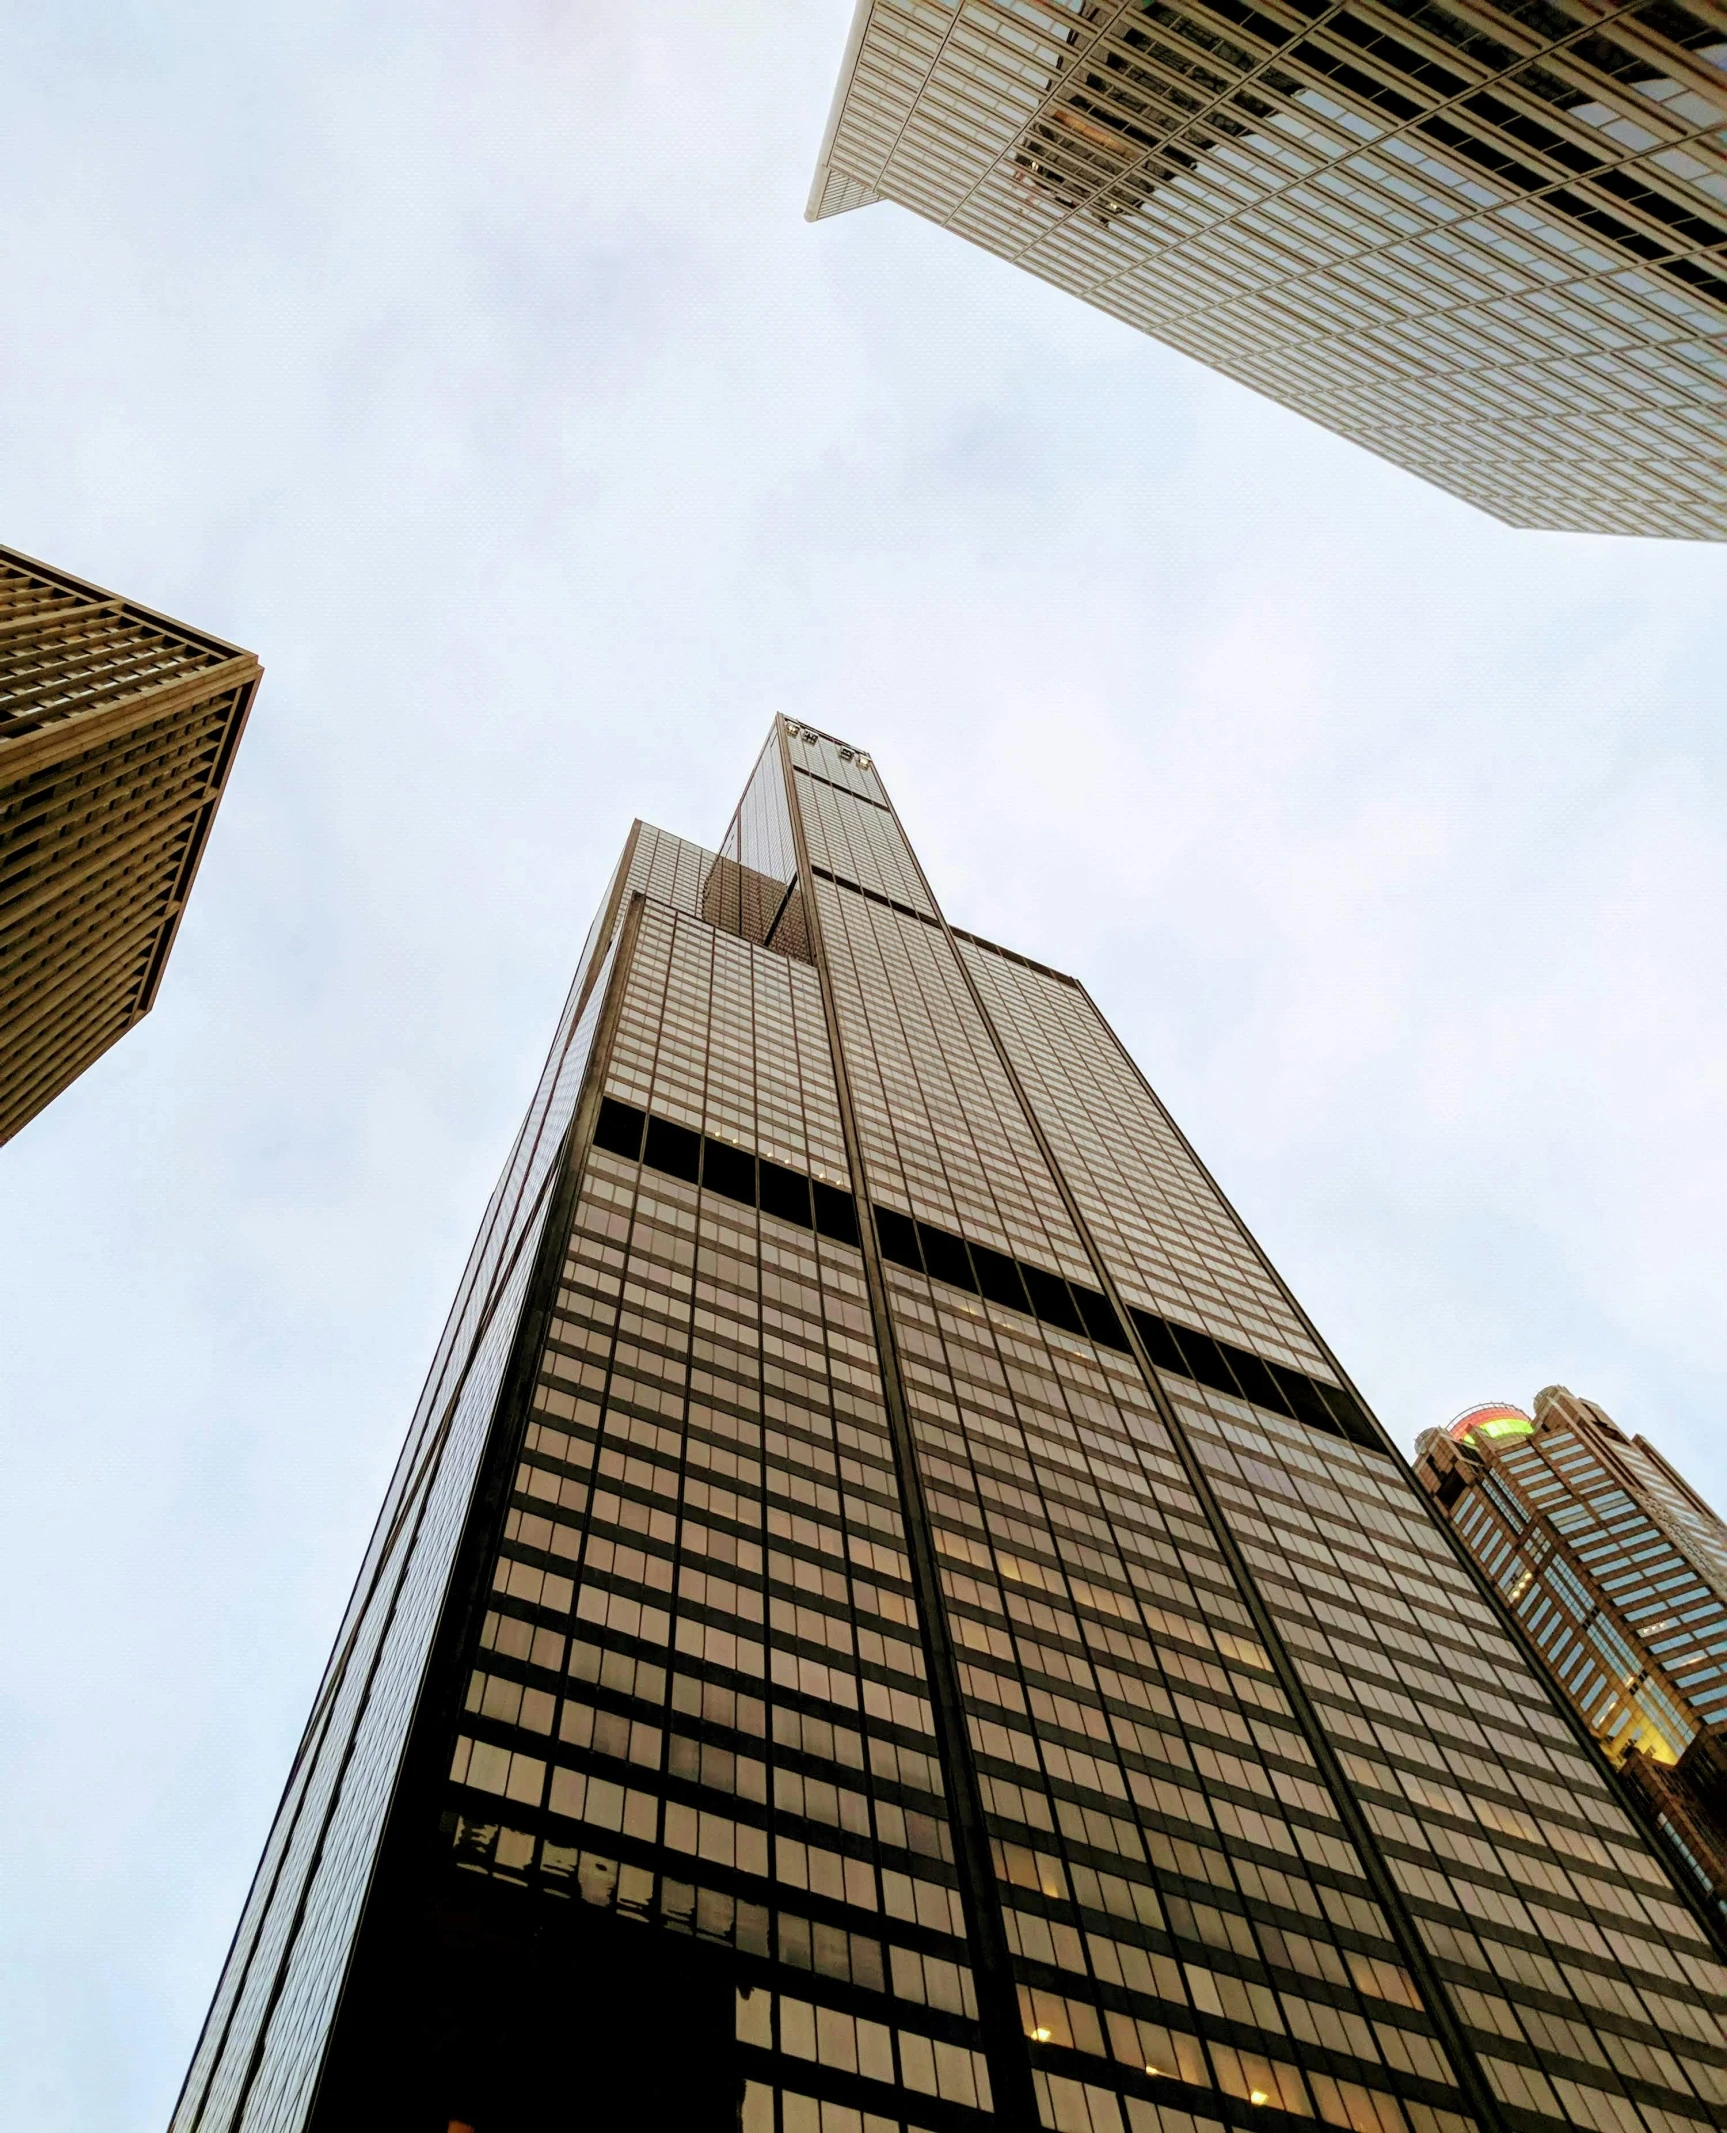 looking up at tall buildings from the ground